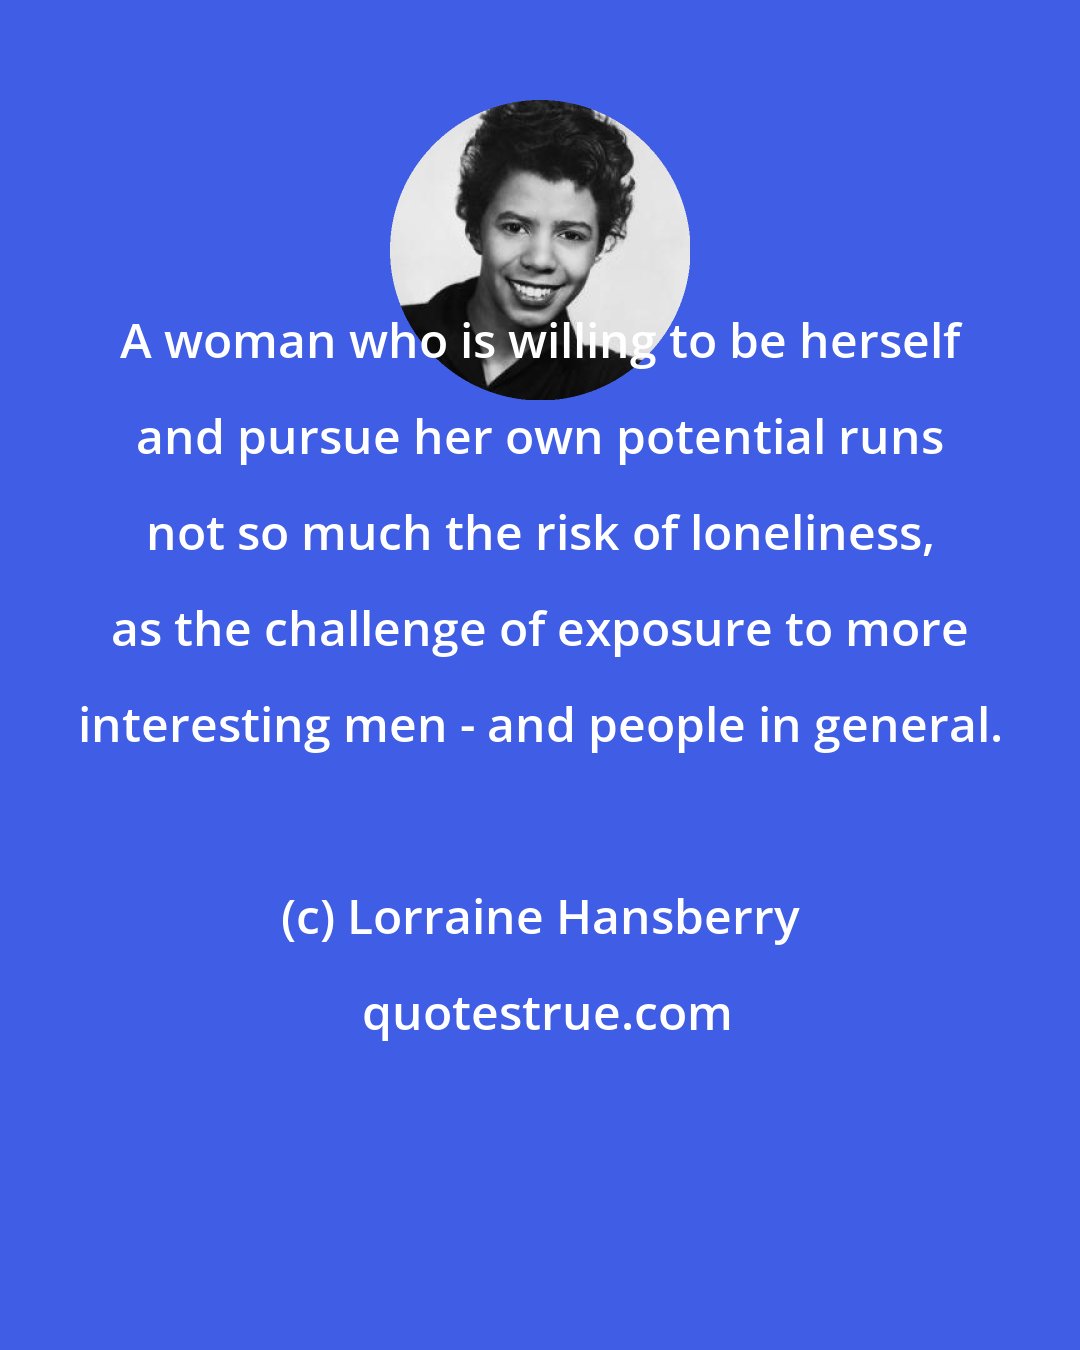 Lorraine Hansberry: A woman who is willing to be herself and pursue her own potential runs not so much the risk of loneliness, as the challenge of exposure to more interesting men - and people in general.